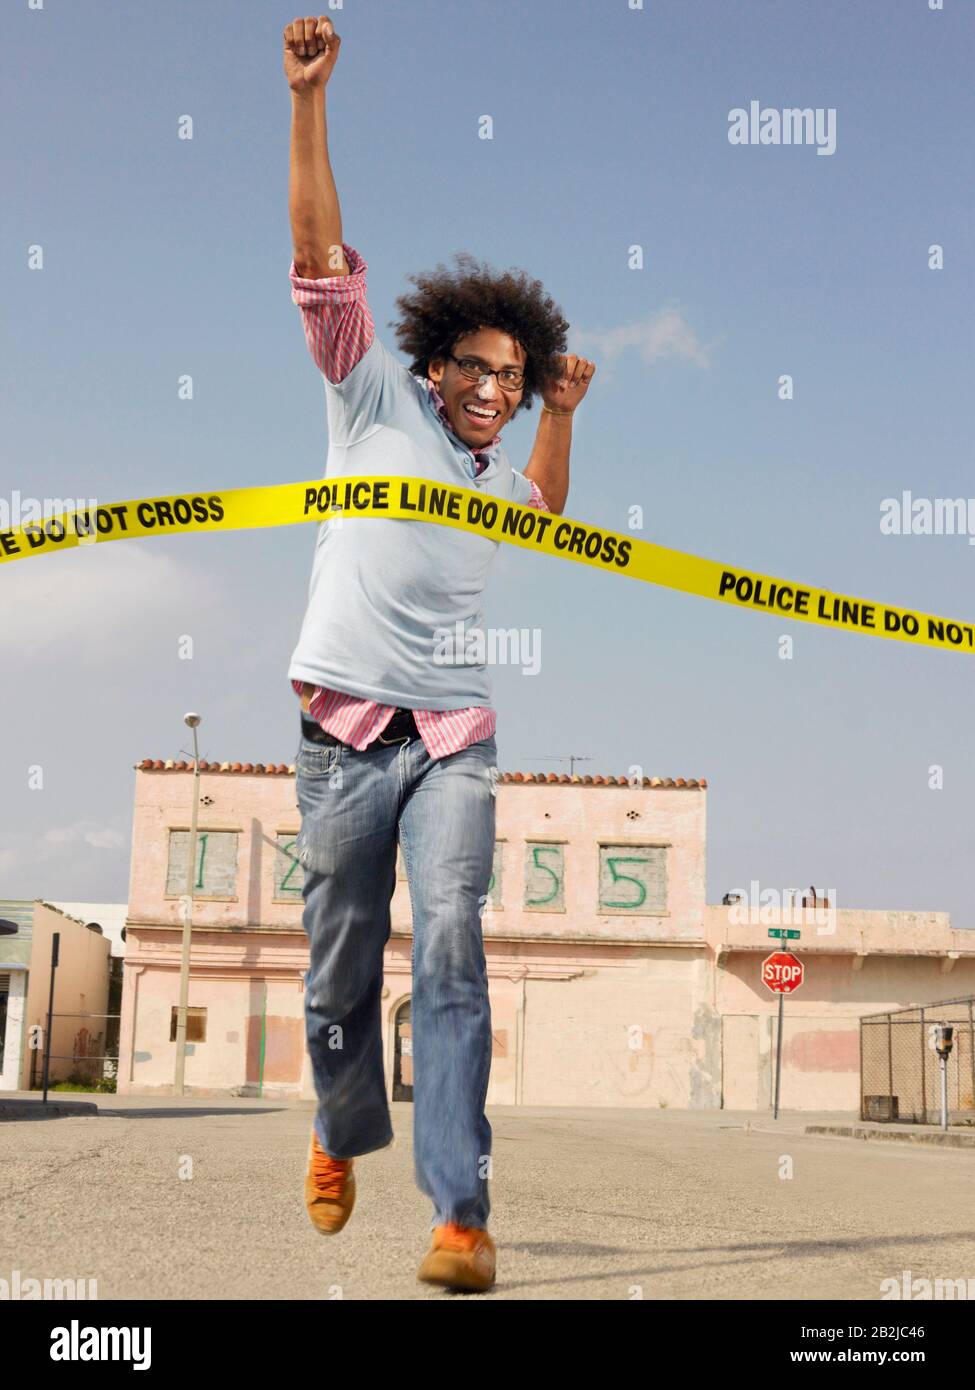 Young man crossing police tape in street Stock Photo